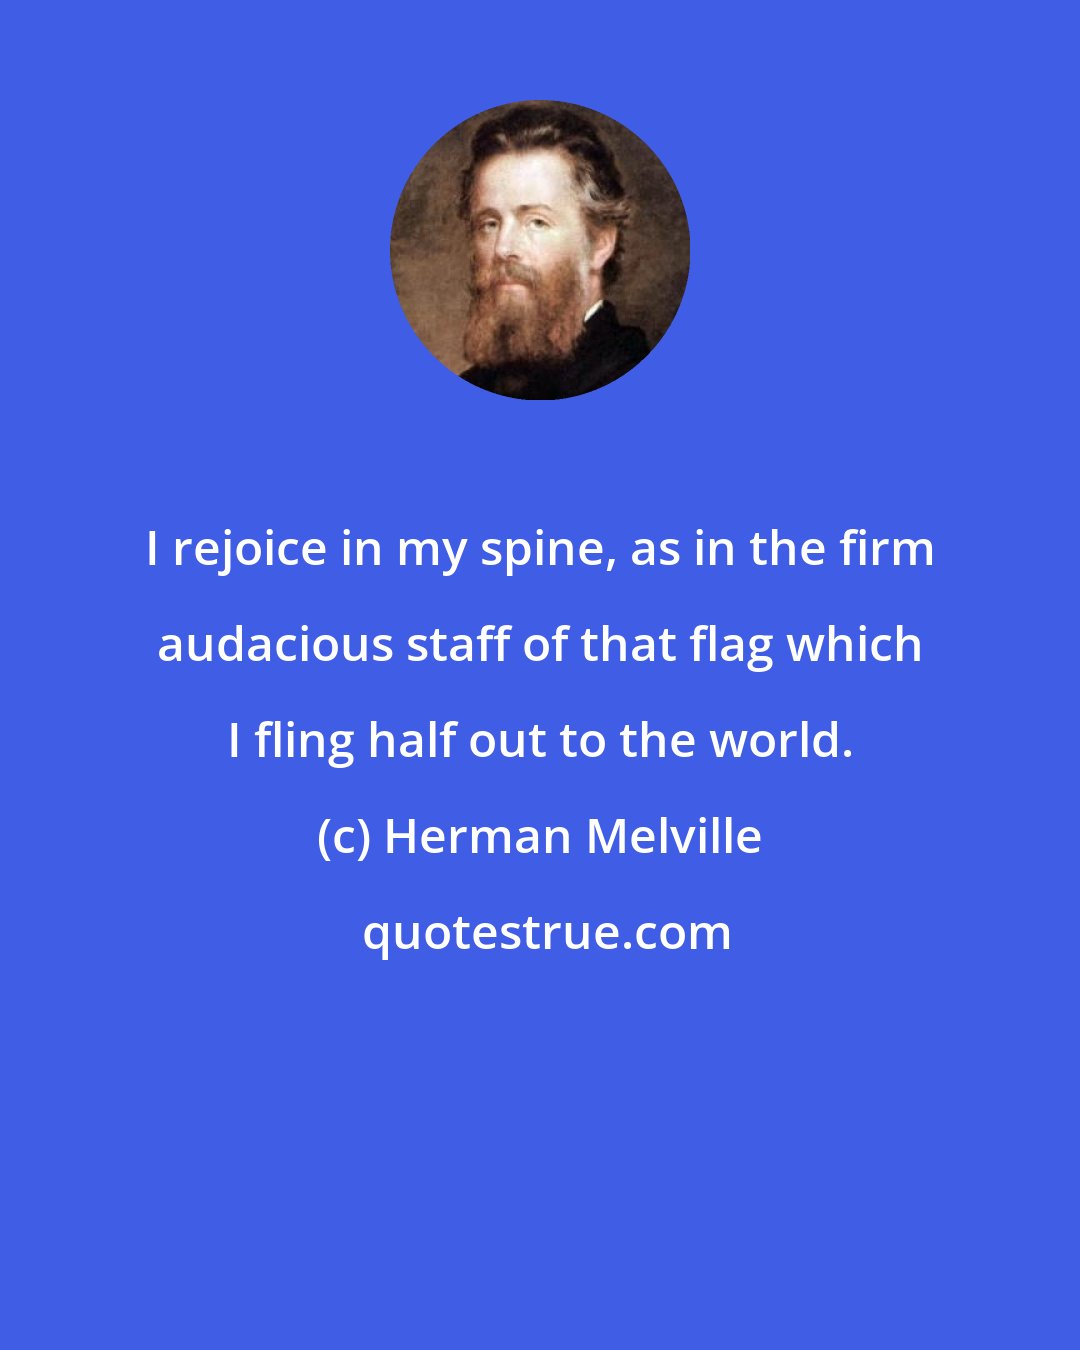 Herman Melville: I rejoice in my spine, as in the firm audacious staff of that flag which I fling half out to the world.